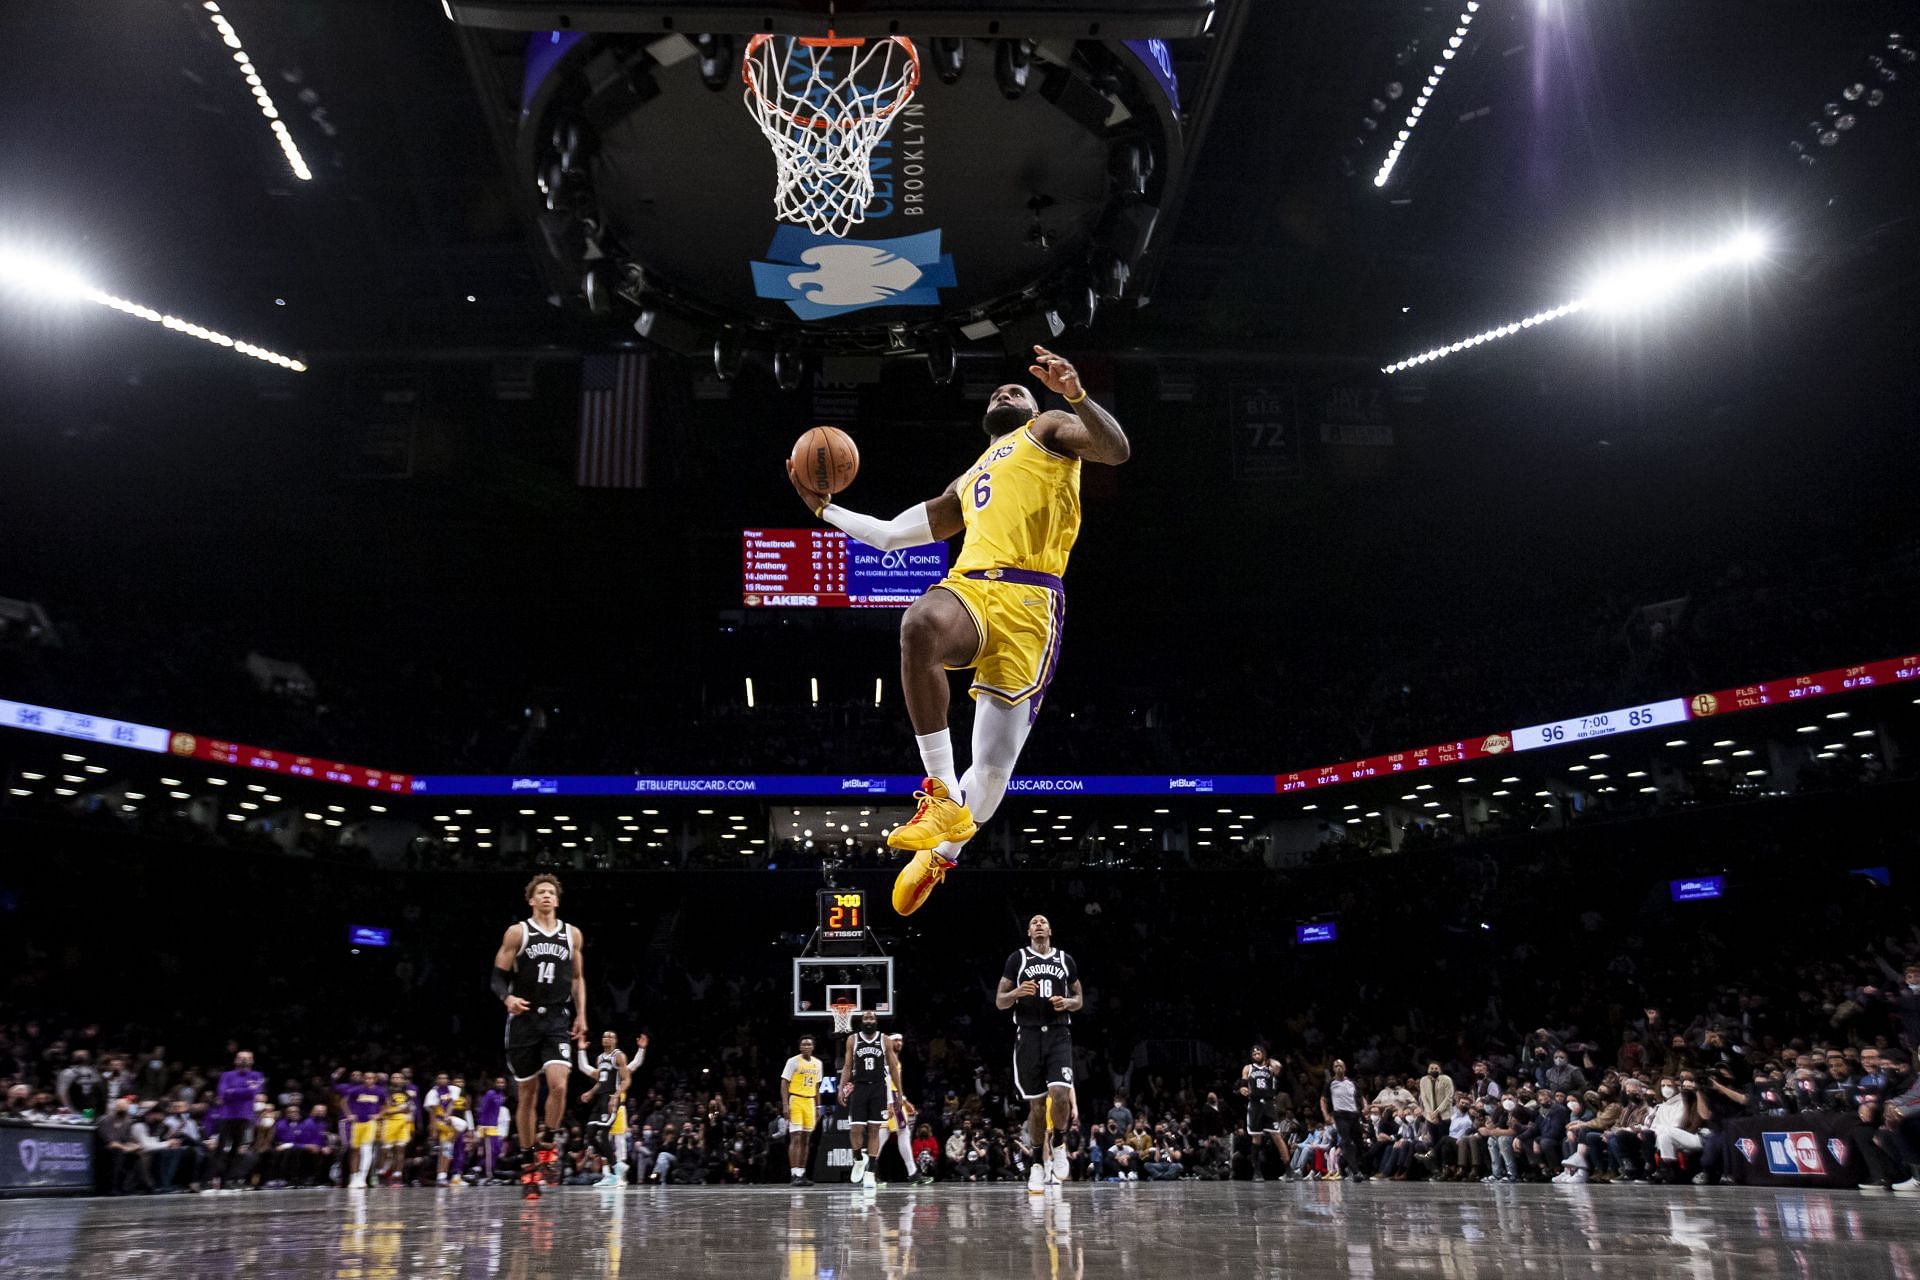 LeBron James #6 of the Los Angeles Lakers dunks against the Brooklyn Nets